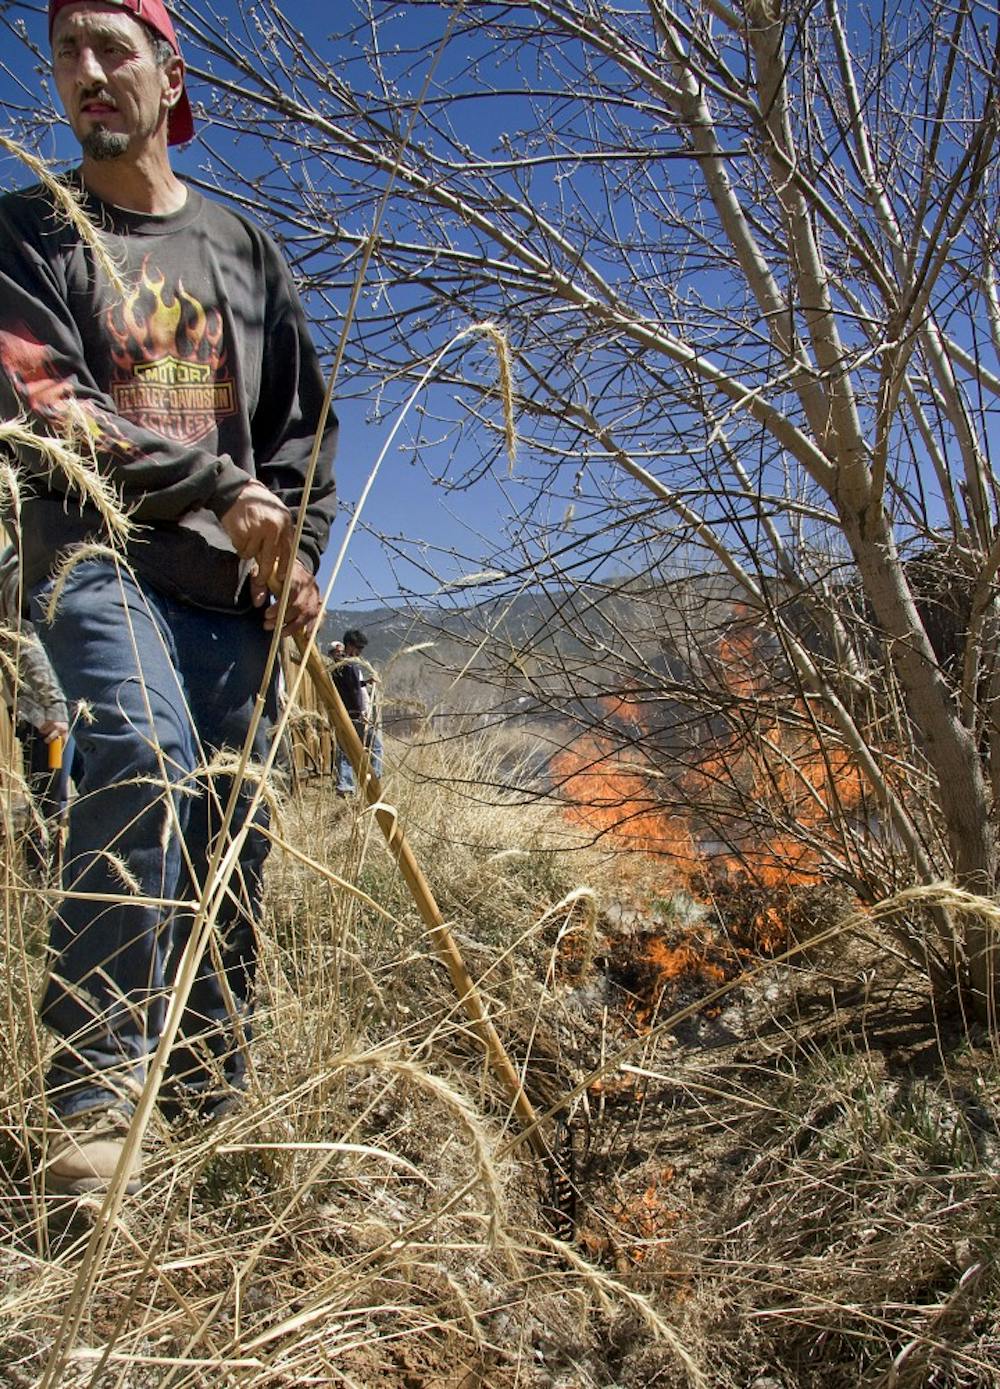 	Gustavo Lucero drags a rake with burning brush through the acequia to help clear it out before they run the water. Santistevan said the acequia runs for one week to recharge the groundwater supply before they
distribute it to acequia members.